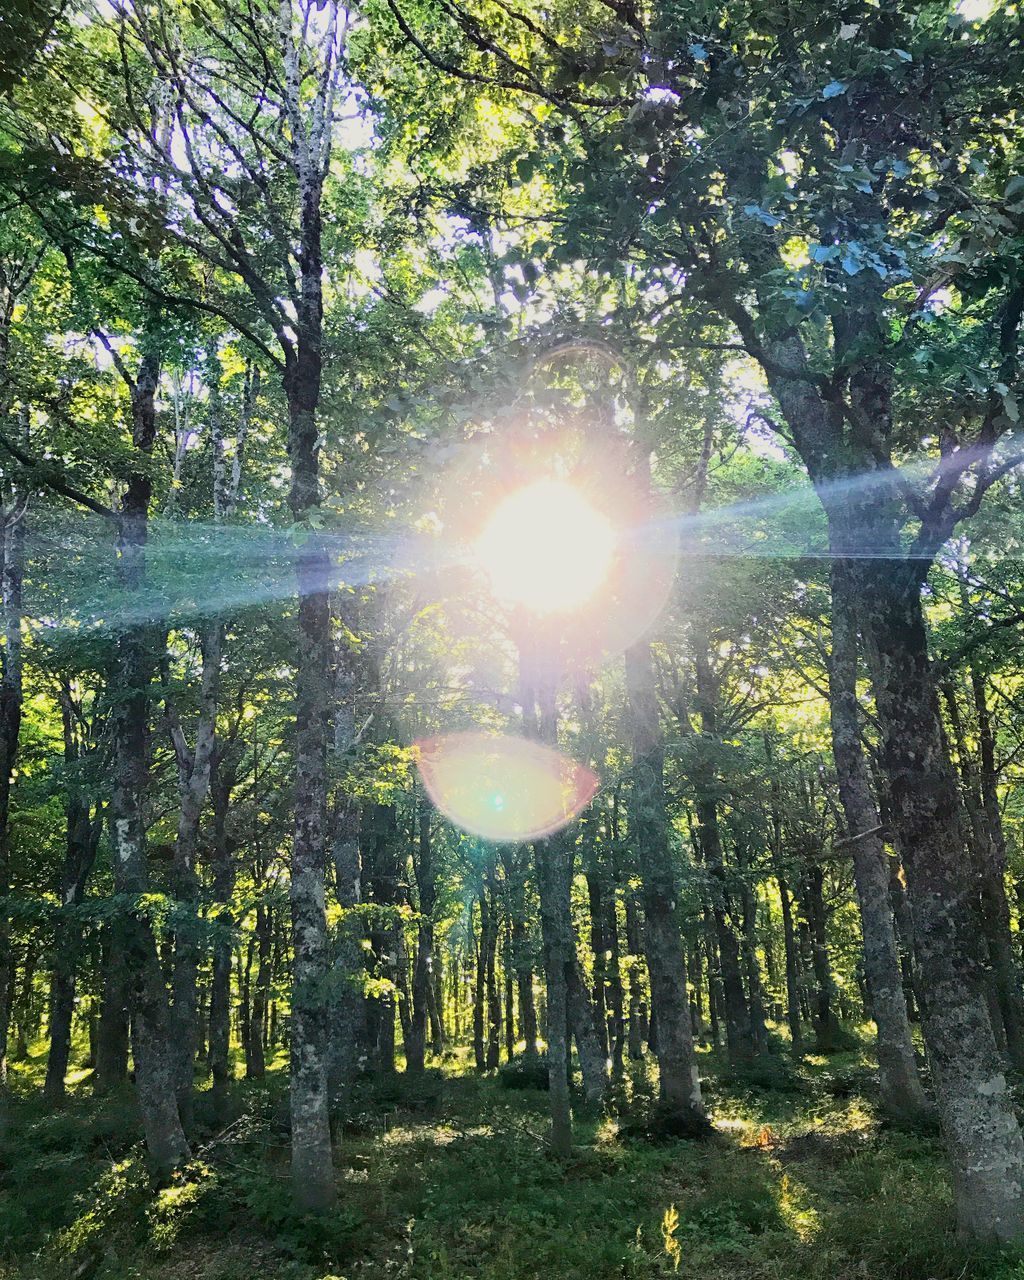 SUN STREAMING THROUGH TREES IN FOREST